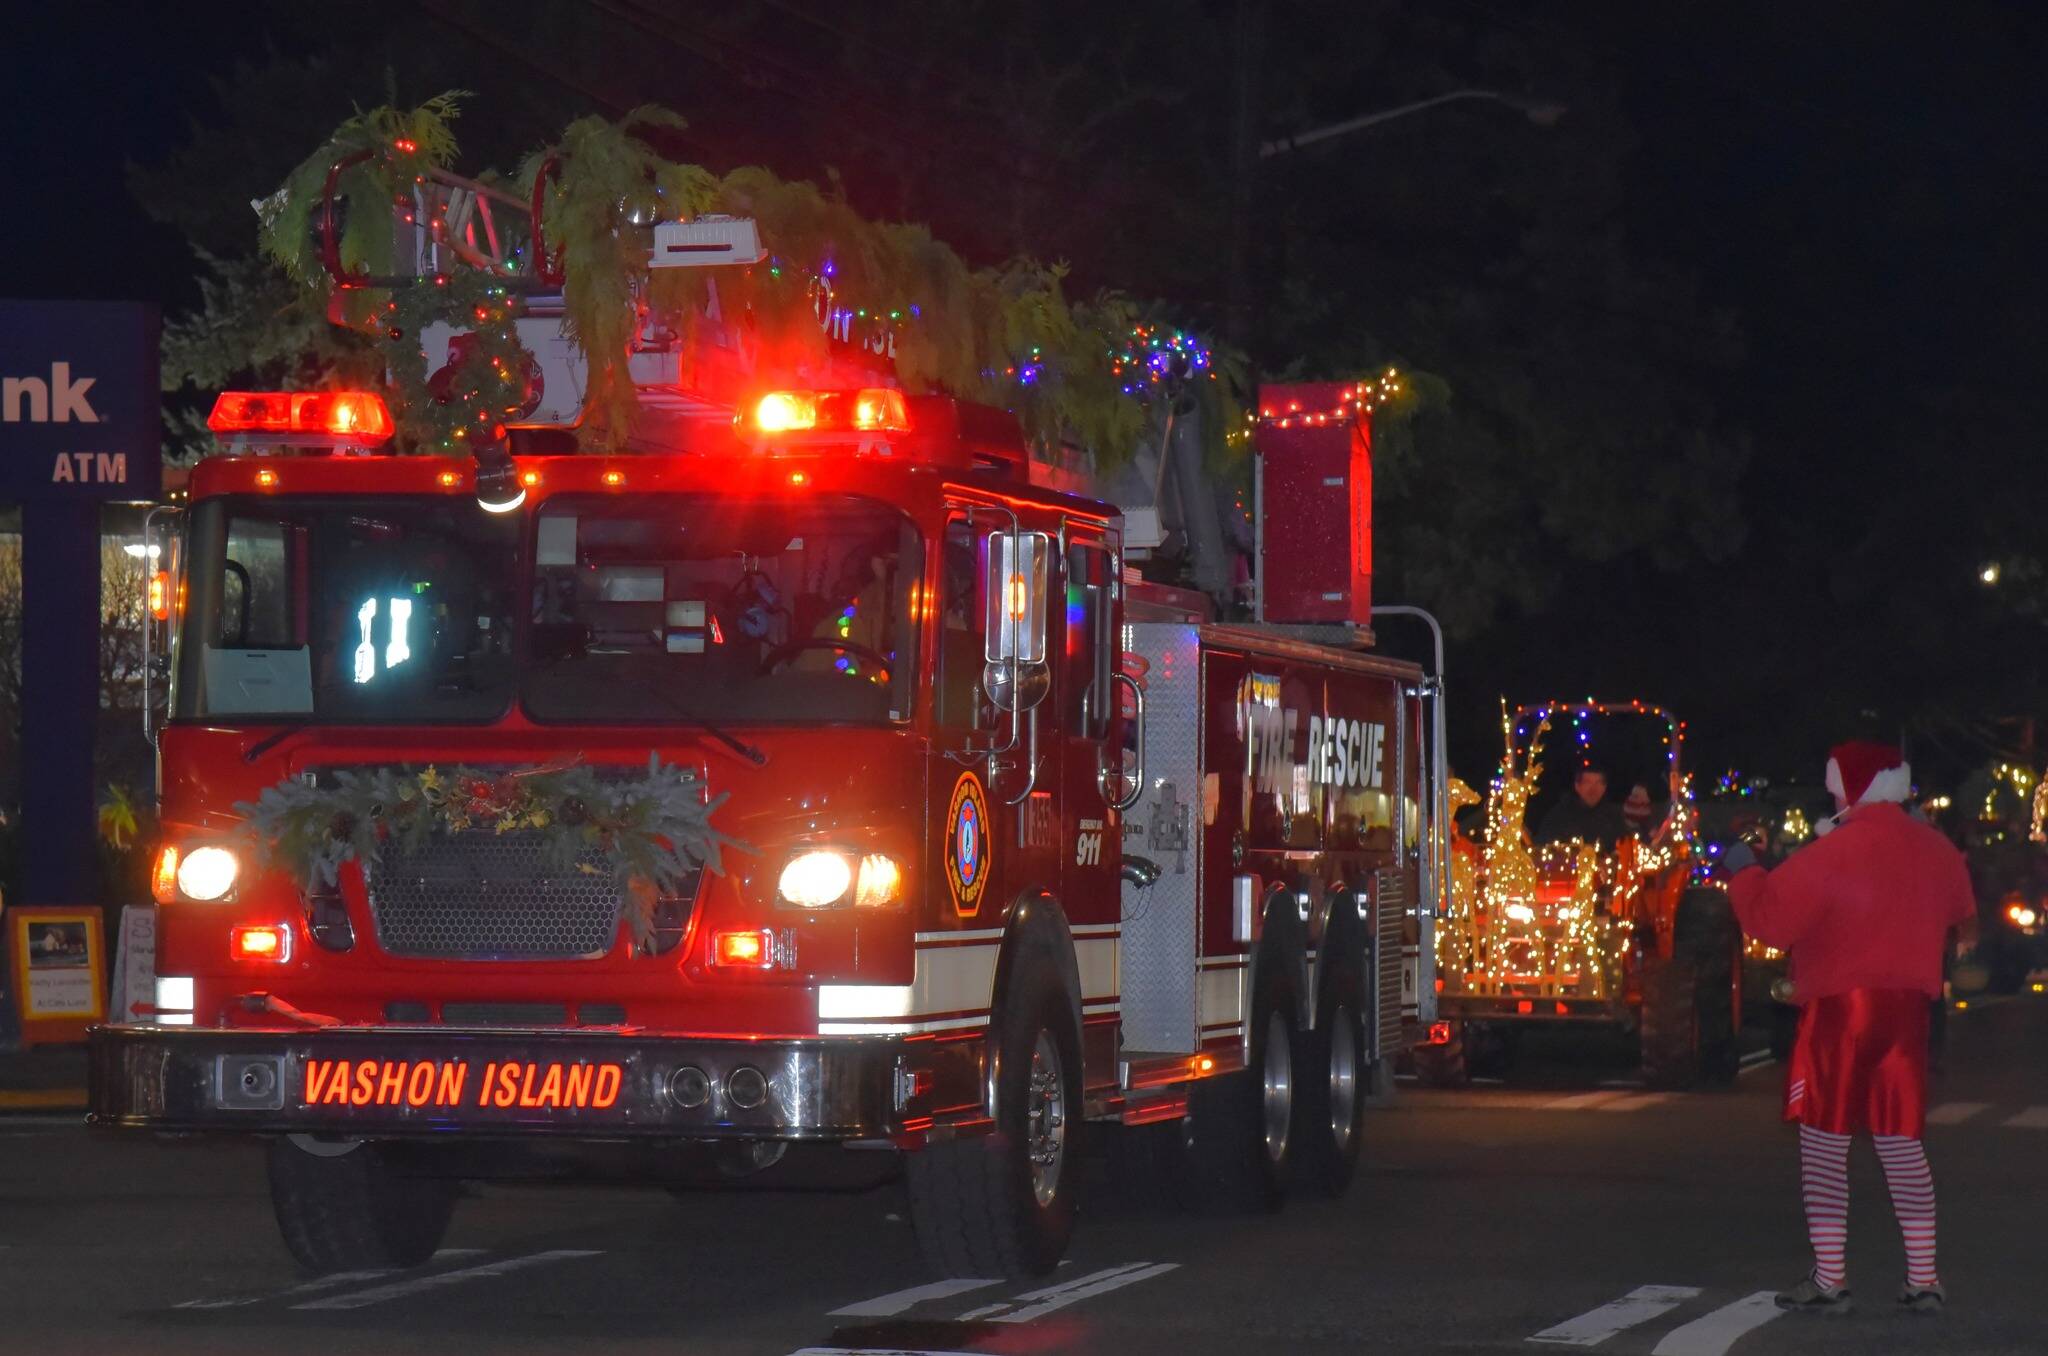 Jim Diers photo
A Vashon Island Fire & Rescue truck leads the parade down Vashon Highway SW.